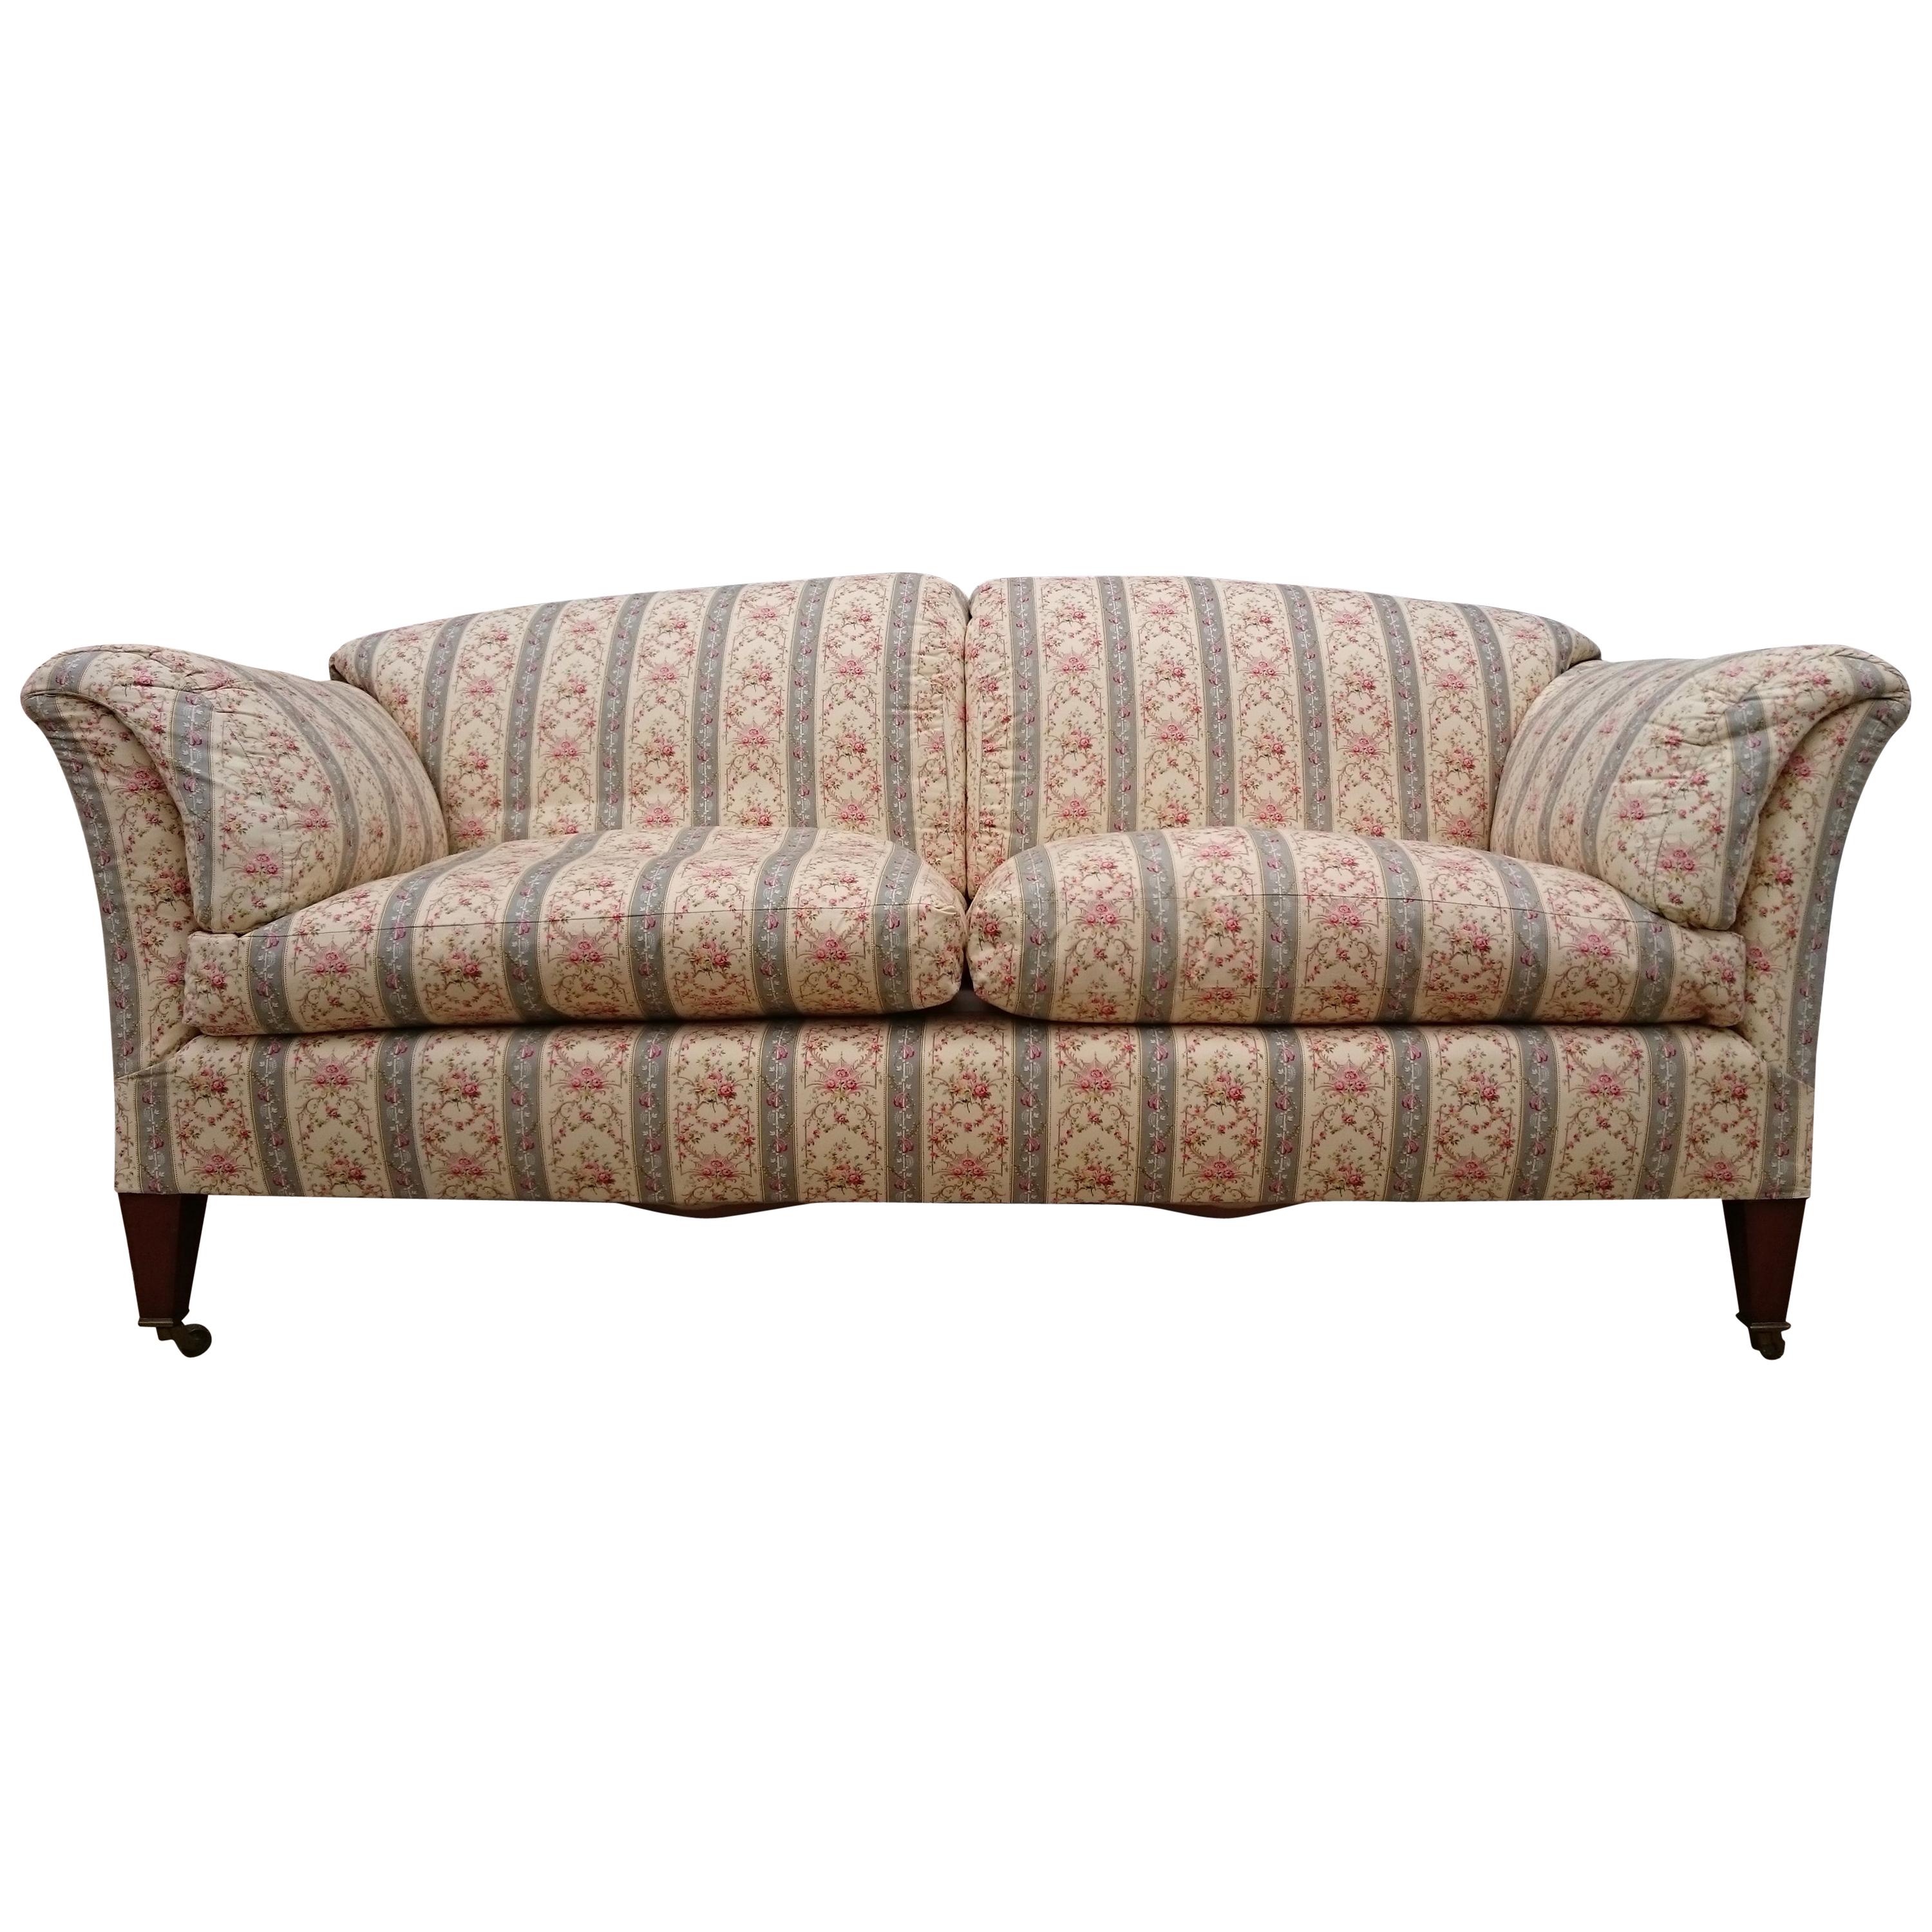 Early 20th Century Comfortable Large Sofa, the Portarlington by Howard and  Sons For Sale at 1stDibs